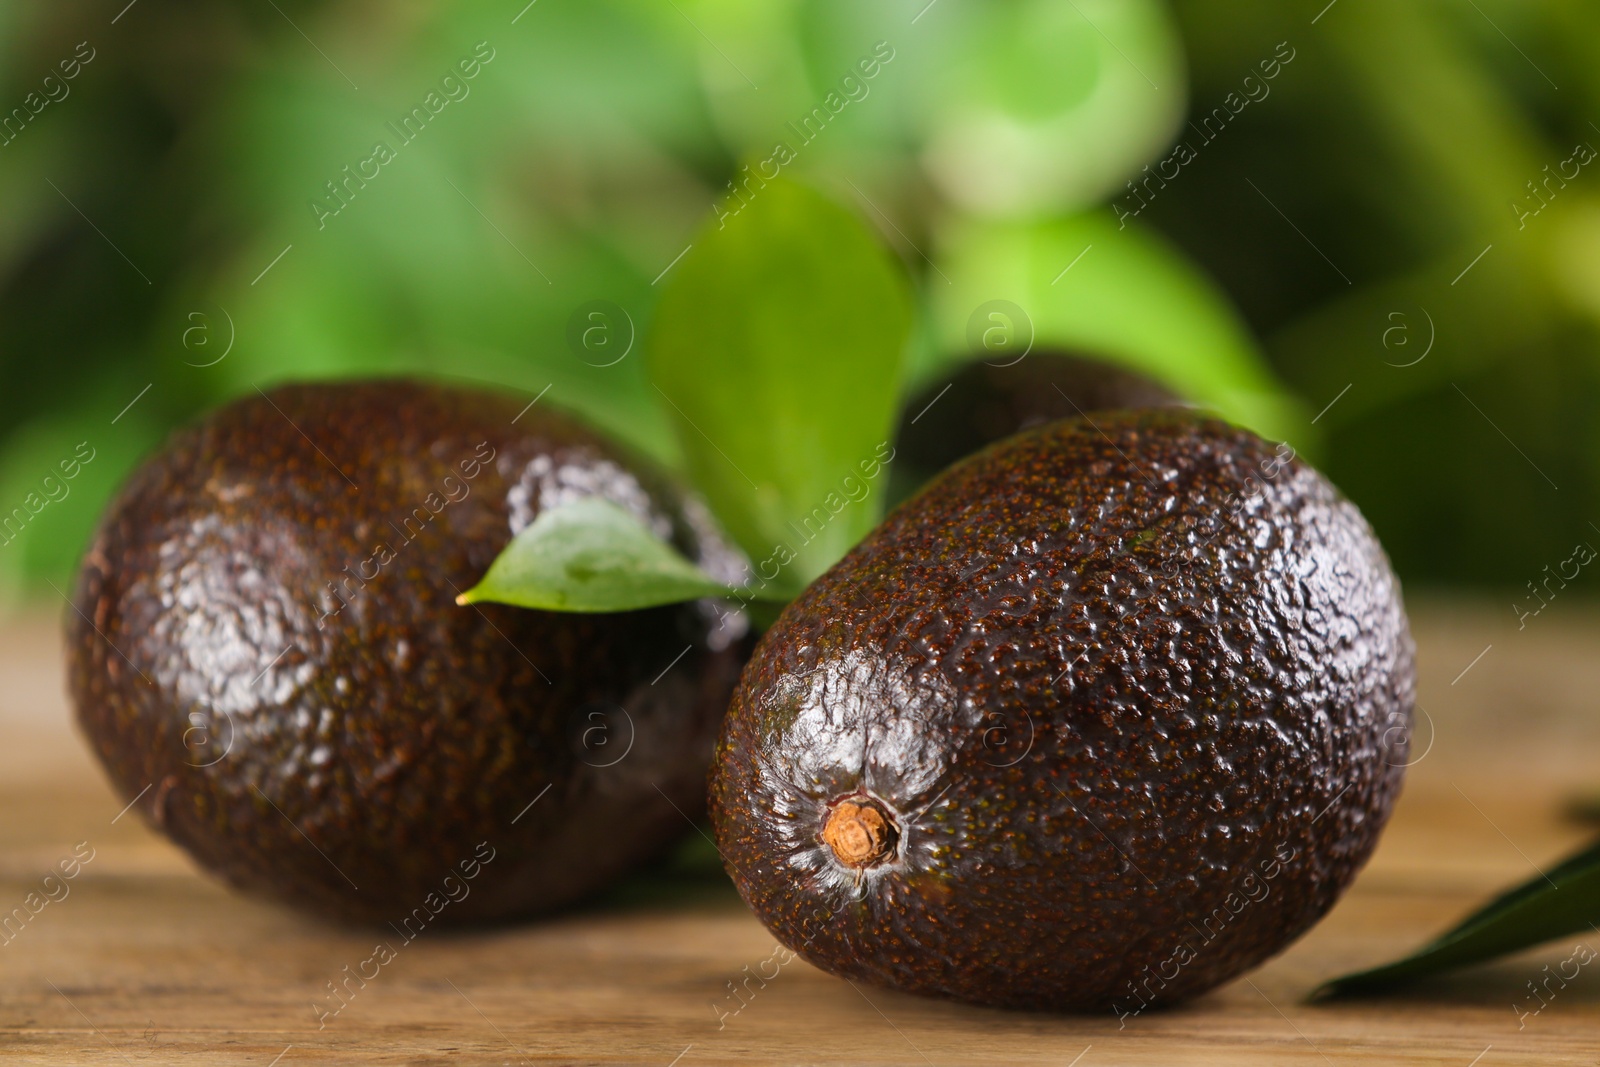 Photo of Whole avocados with green leaf on wooden table, closeup